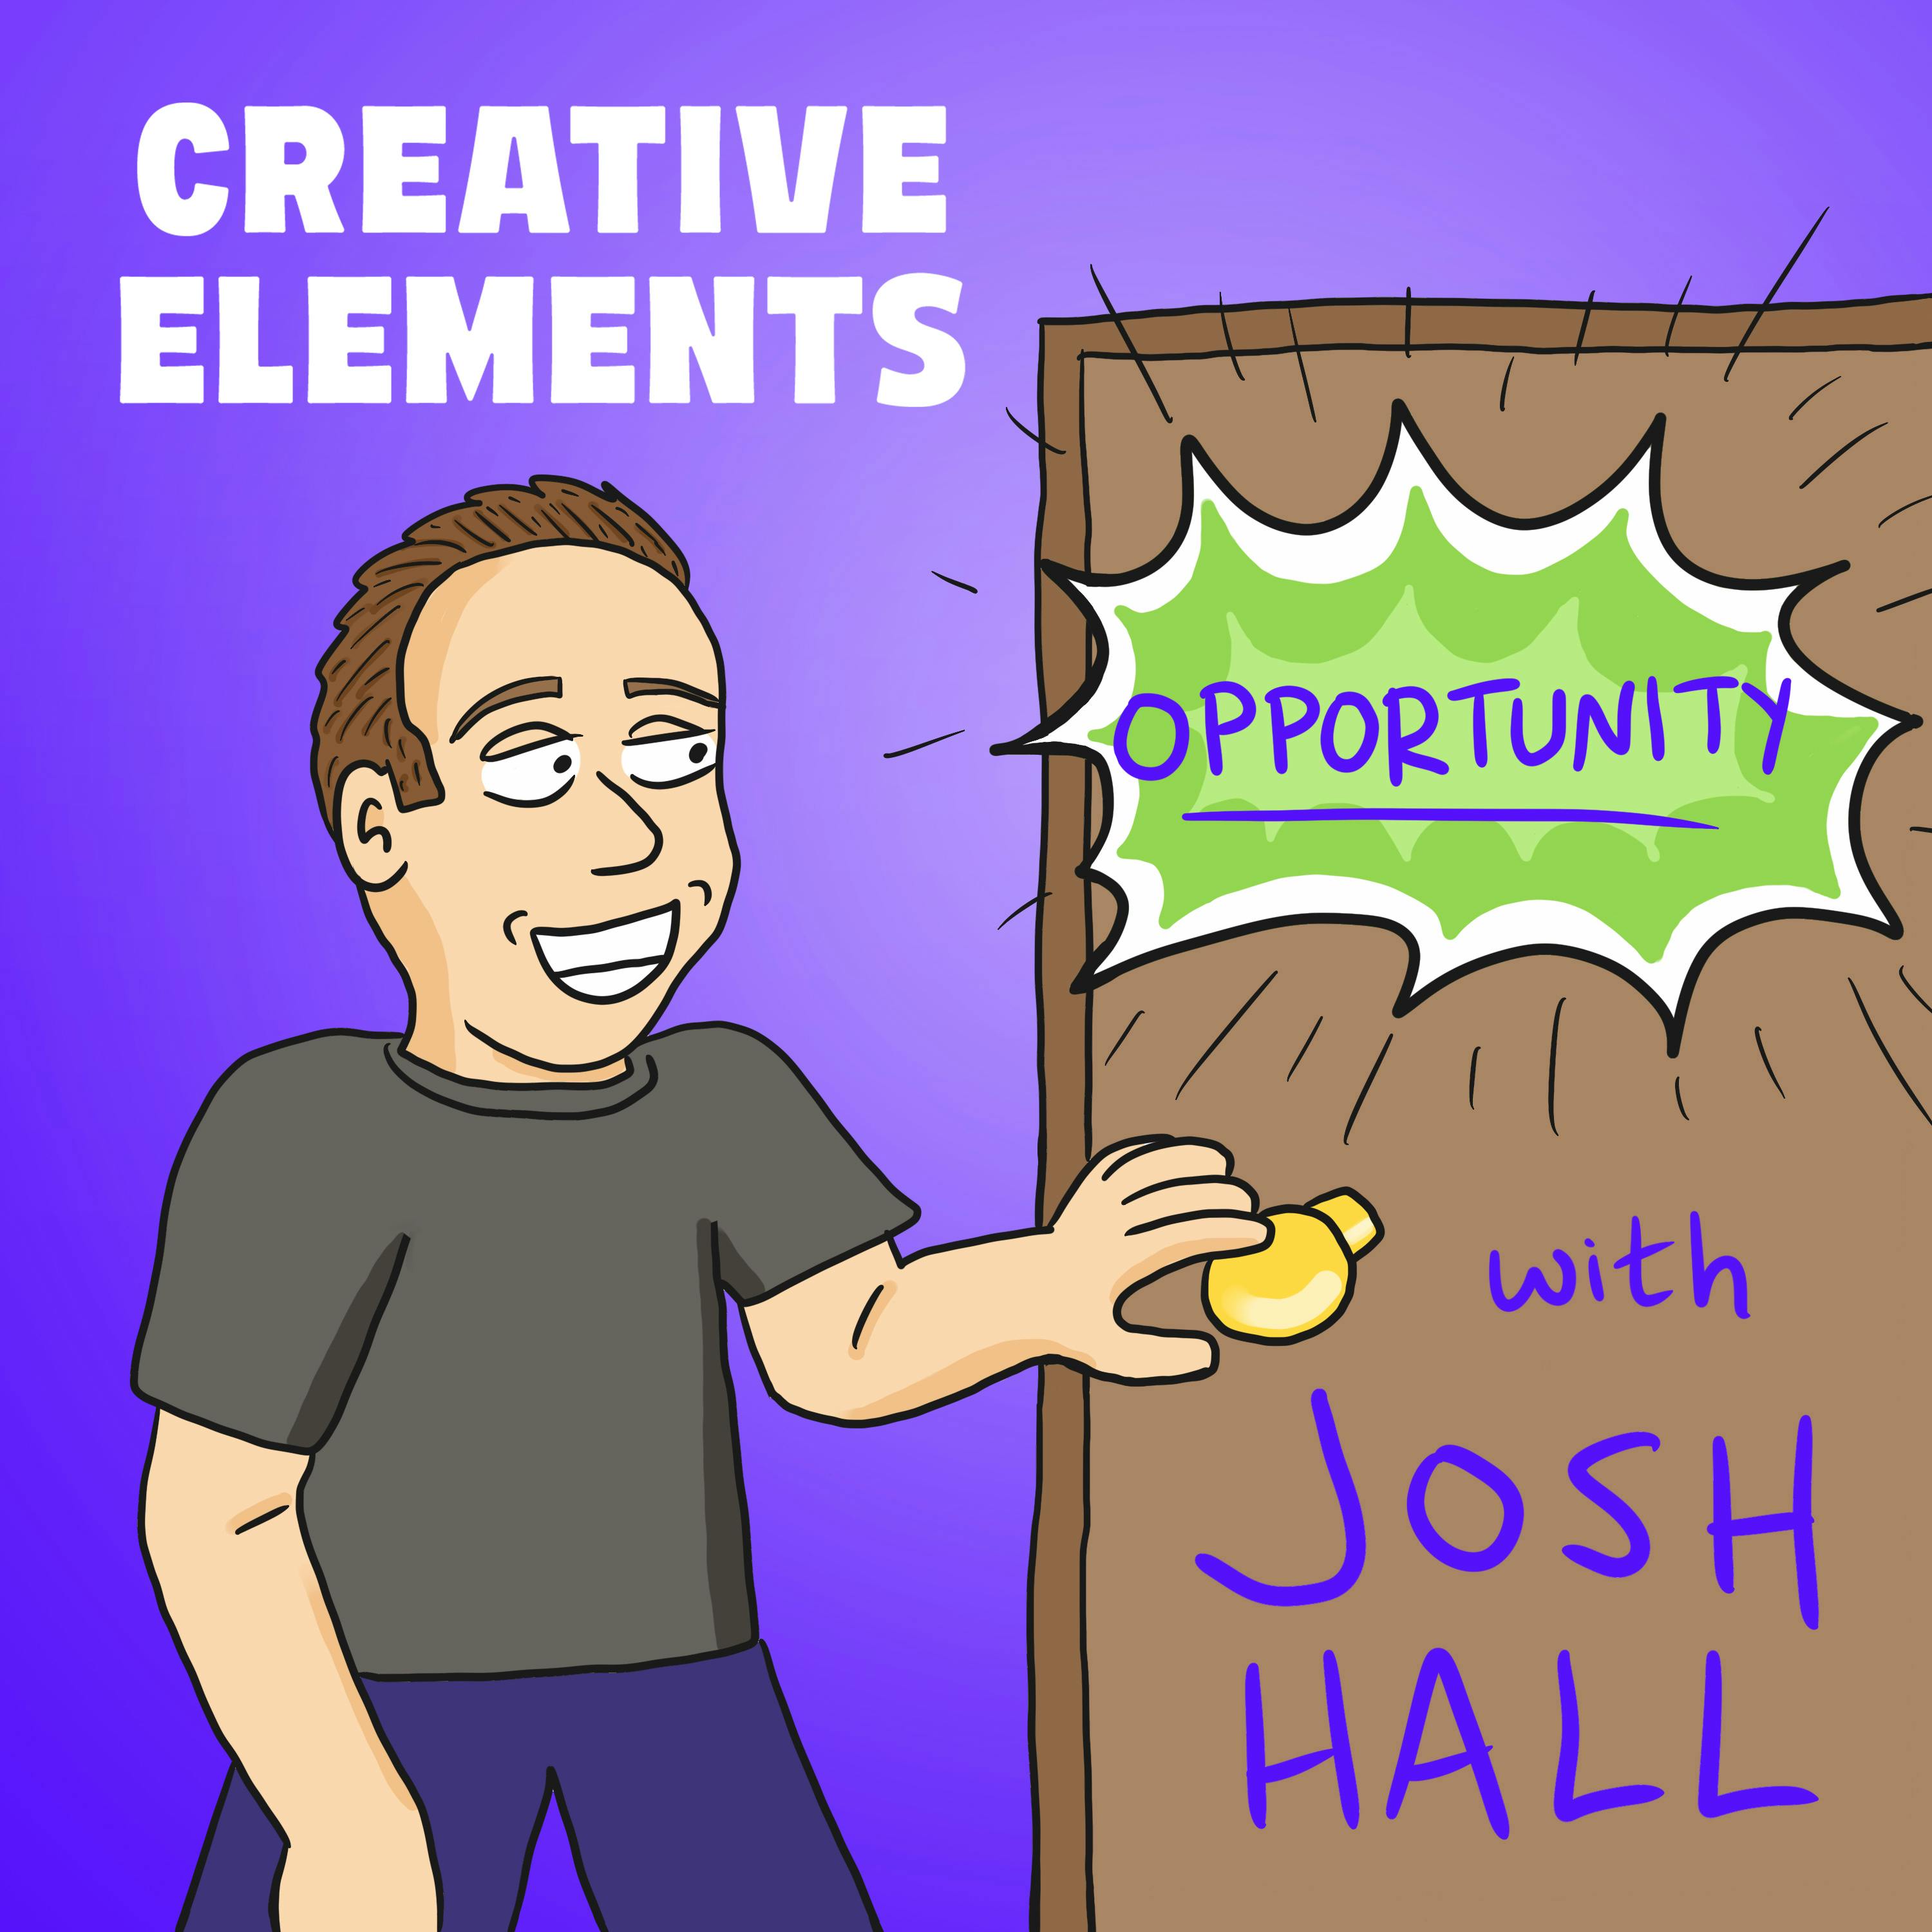 #95: Josh Hall [Opportunity] – from freelance web design to professional creator earning $300K/year